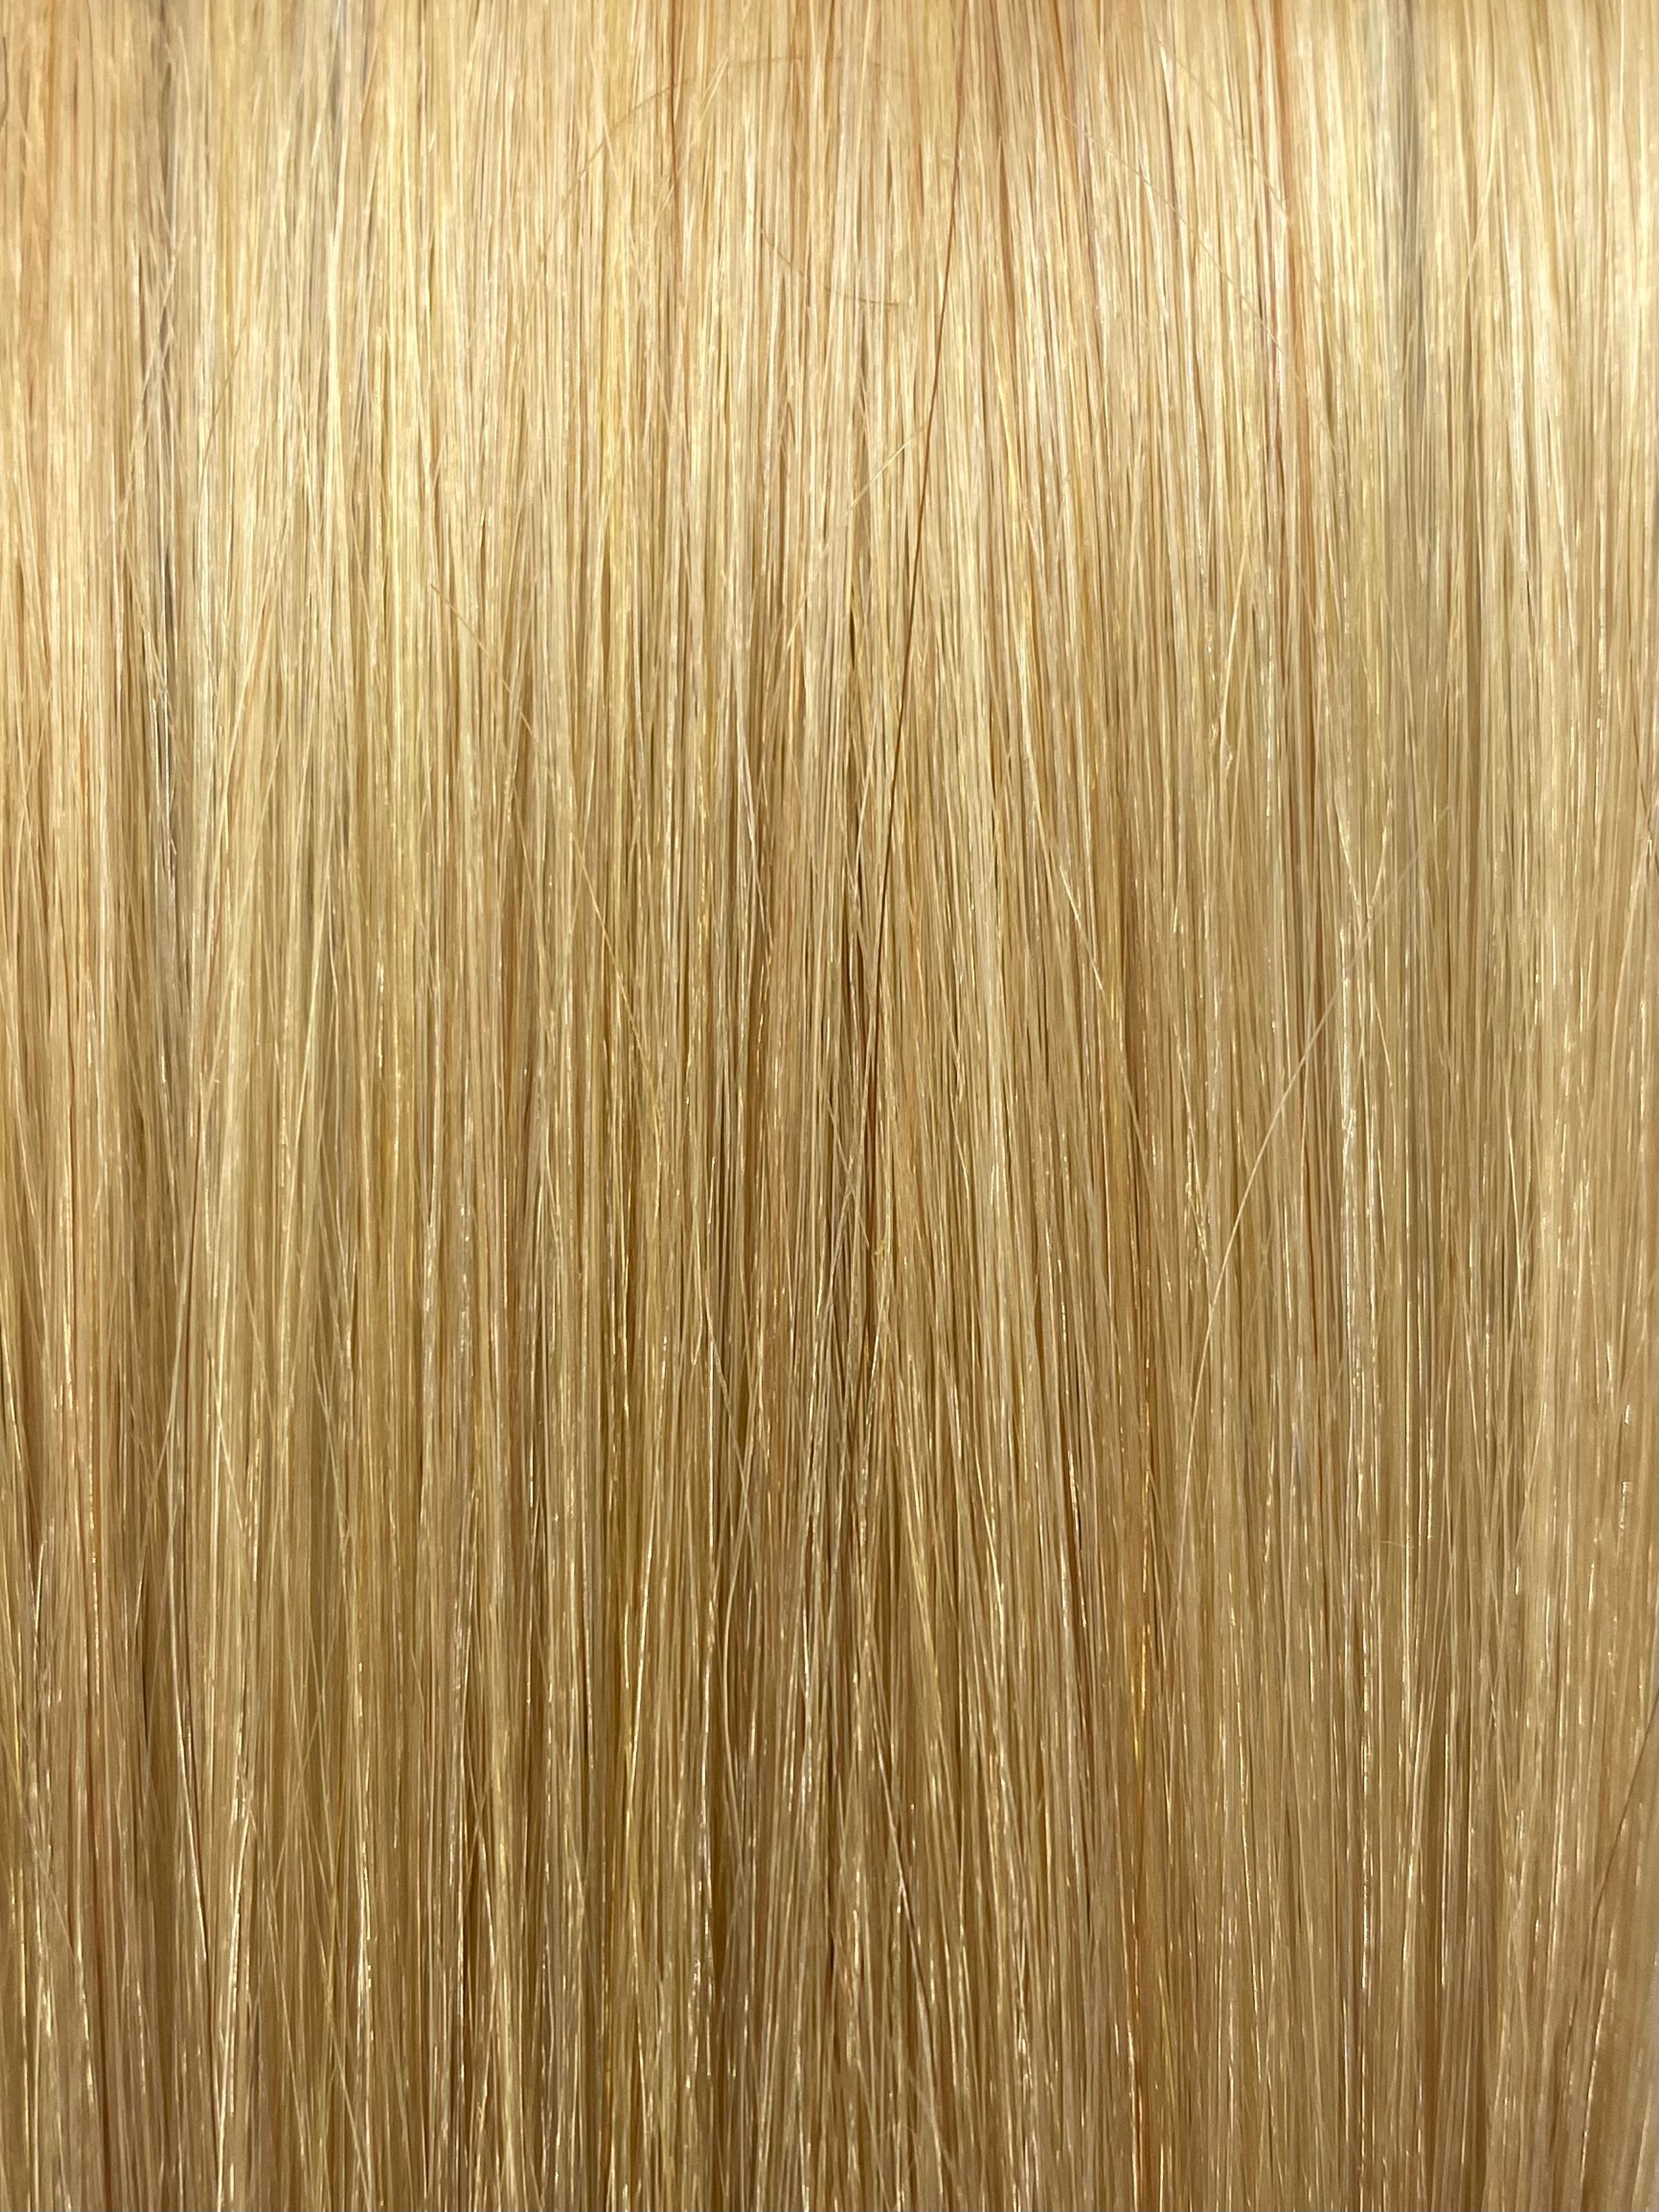 FUSION #DB2 LIGHT GOLDEN BLONDE - 60CM/ 24 INCHES - 25 GRAMS